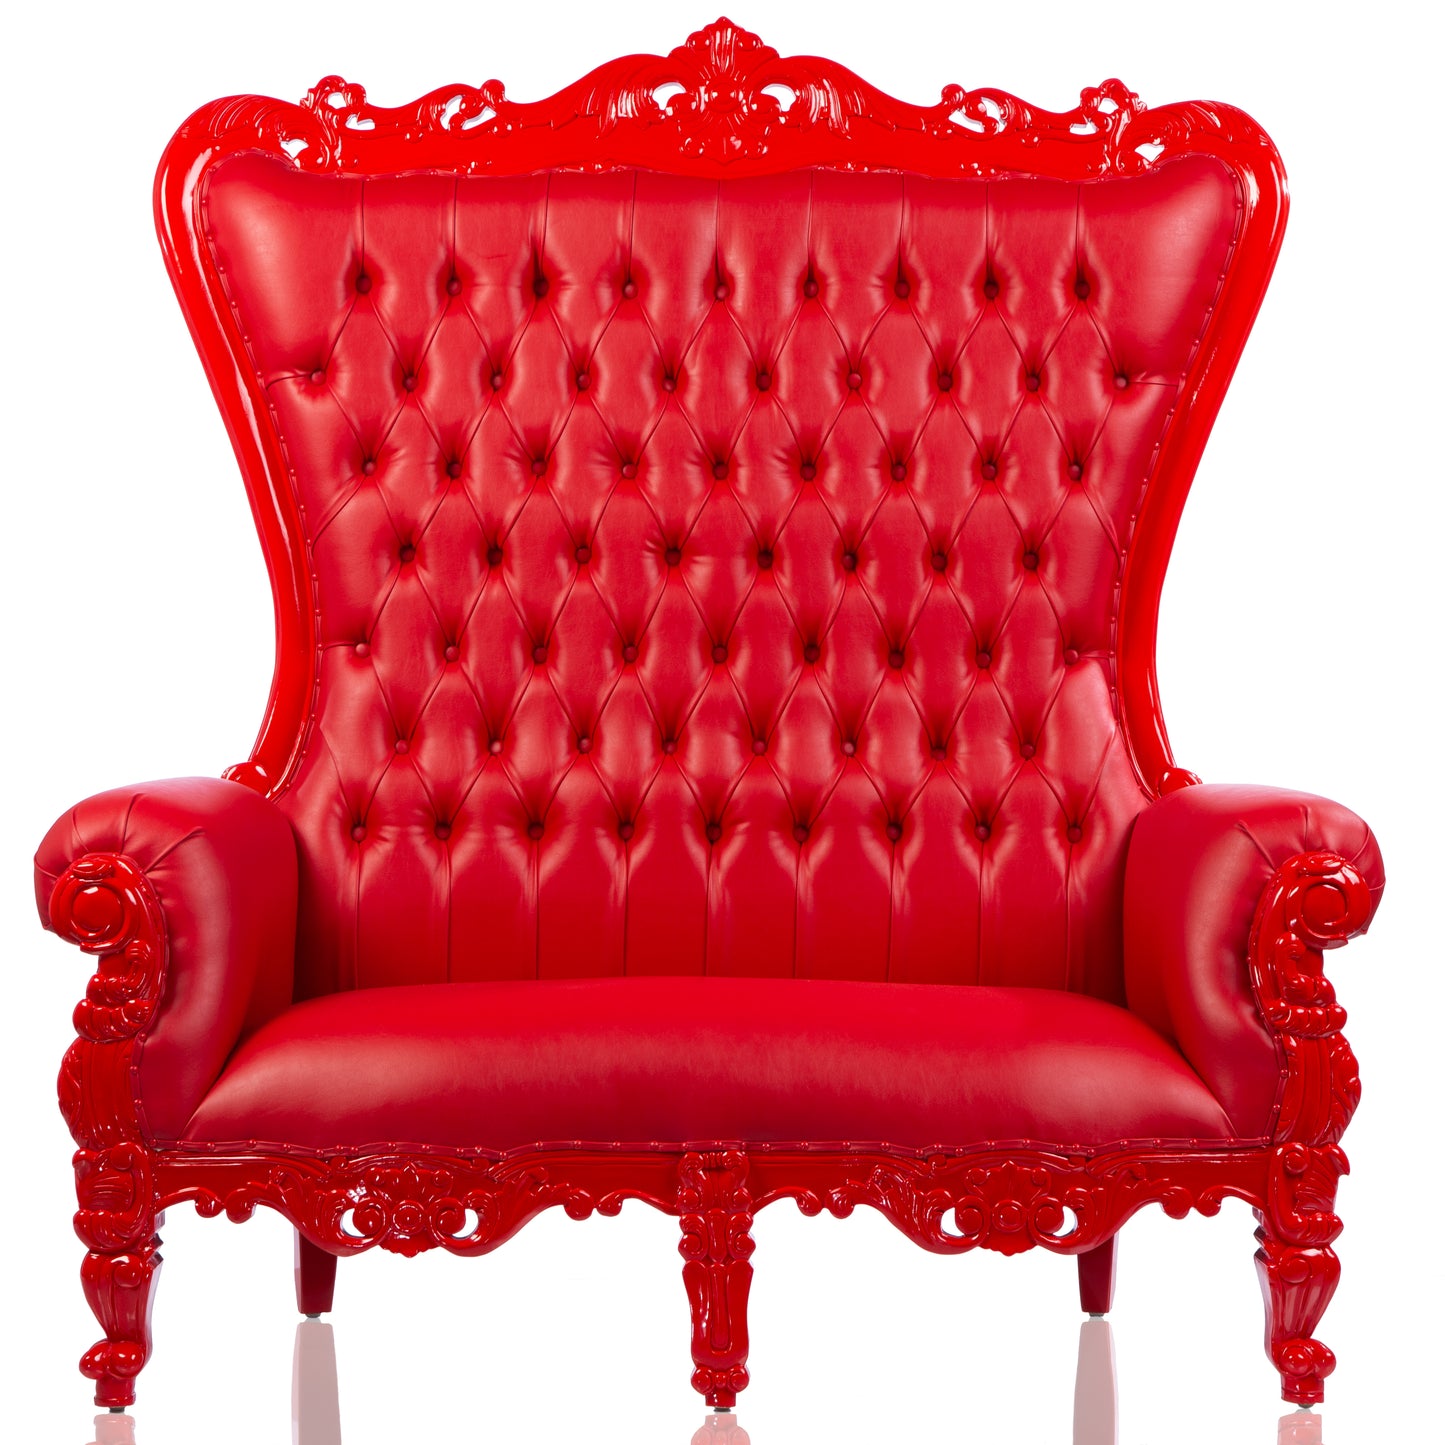 The Sexy Double Throne Red/Red Leather (West Coast)